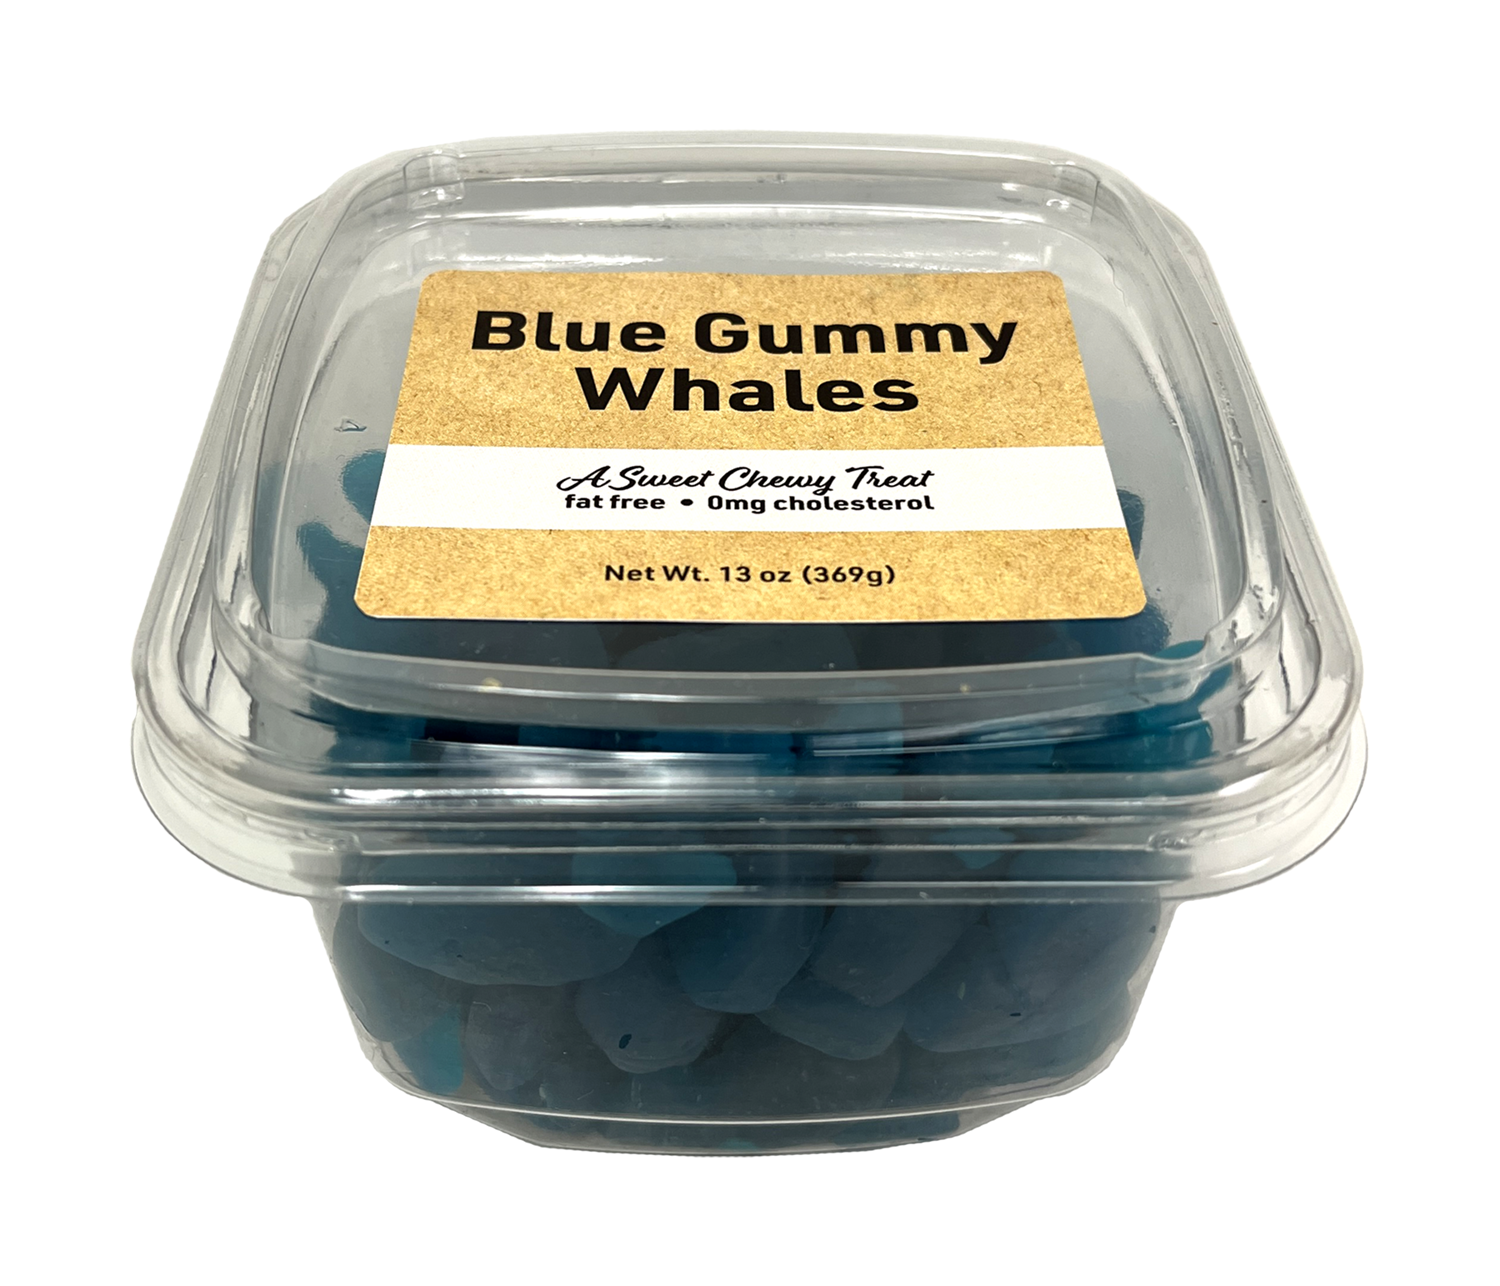 Blue gummy whales, 13 oz container